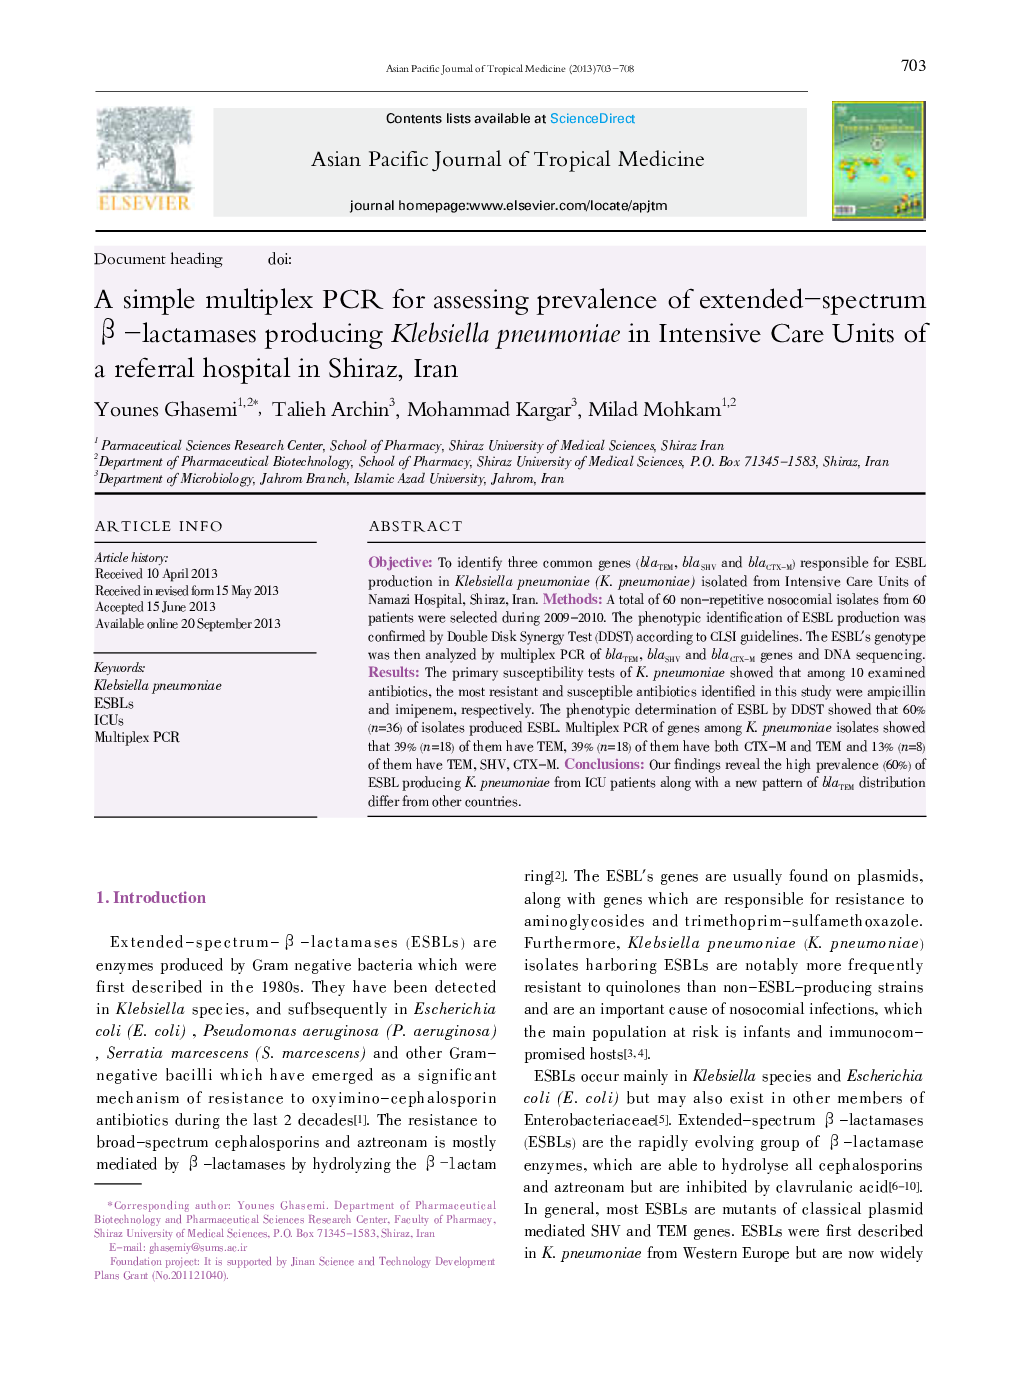 A simple multiplex PCR for assessing prevalence of extended-spectrum β-lactamases producing Klebsiella pneumoniae in Intensive Care Units of a referral hospital in Shiraz, Iran 